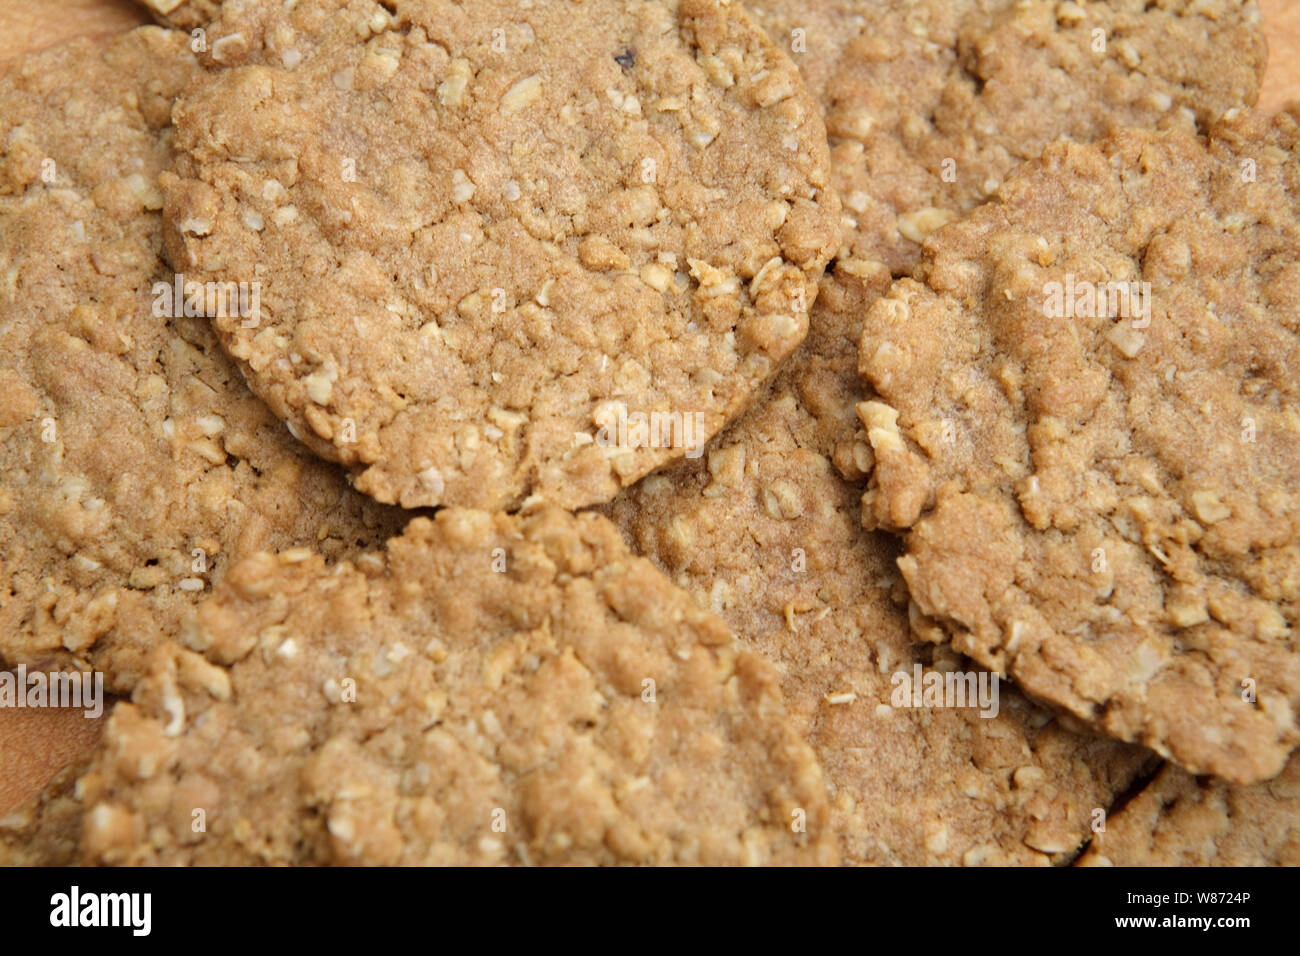 oatcake biscuits made by baking oats. traditionally scottish food often eaten with cheese or stovies Stock Photo